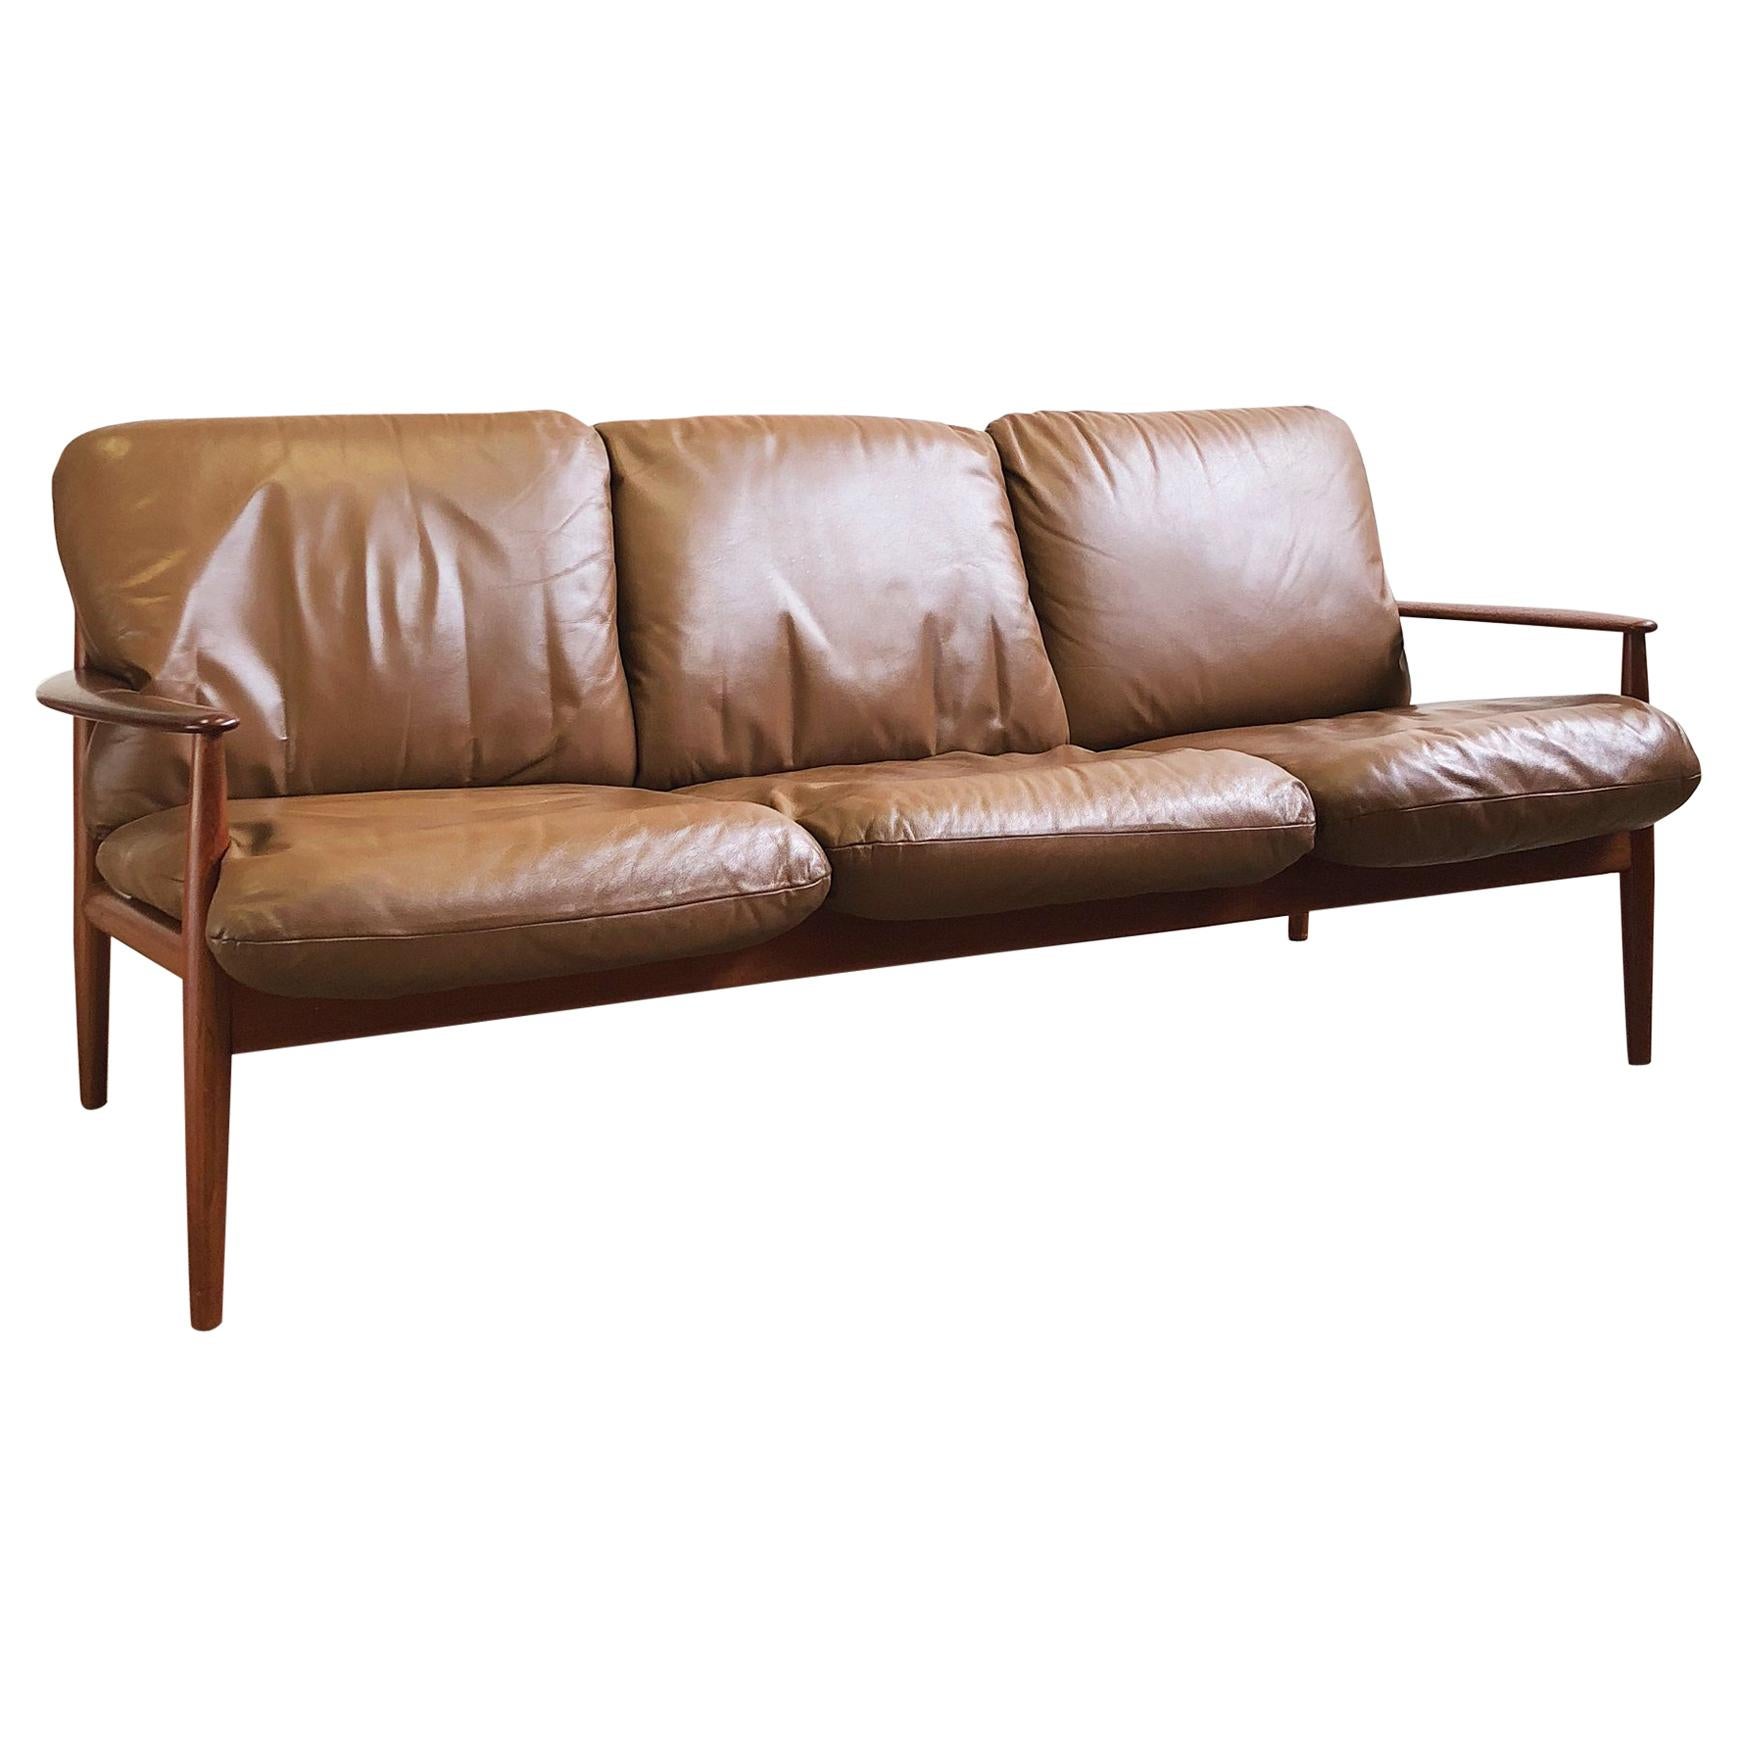 Midcentury Teak Sofa with Leather Cushions by Grete Jalk for Cado For Sale